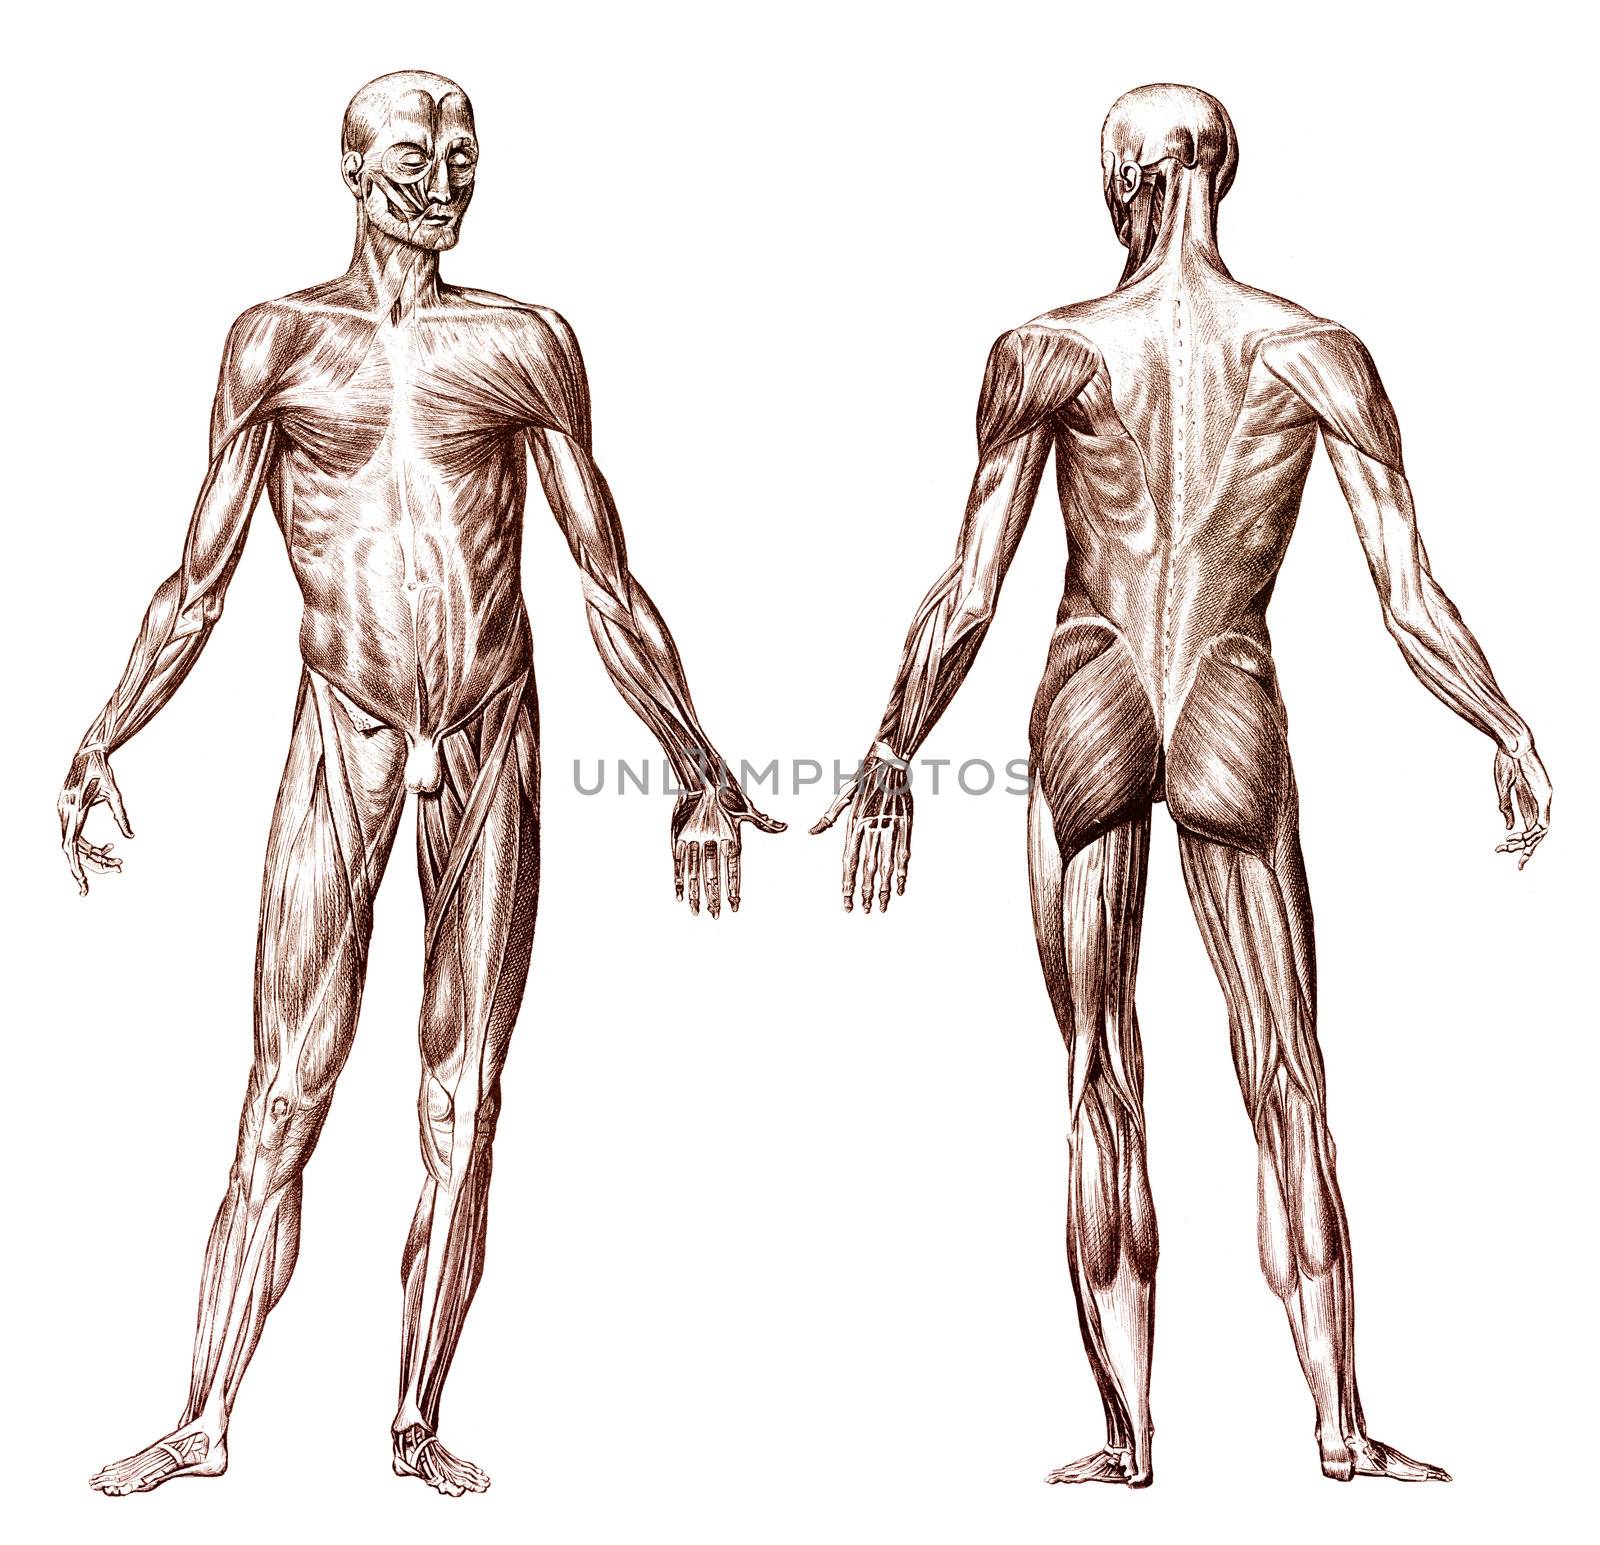 Old engraving of human anatomy muscular system